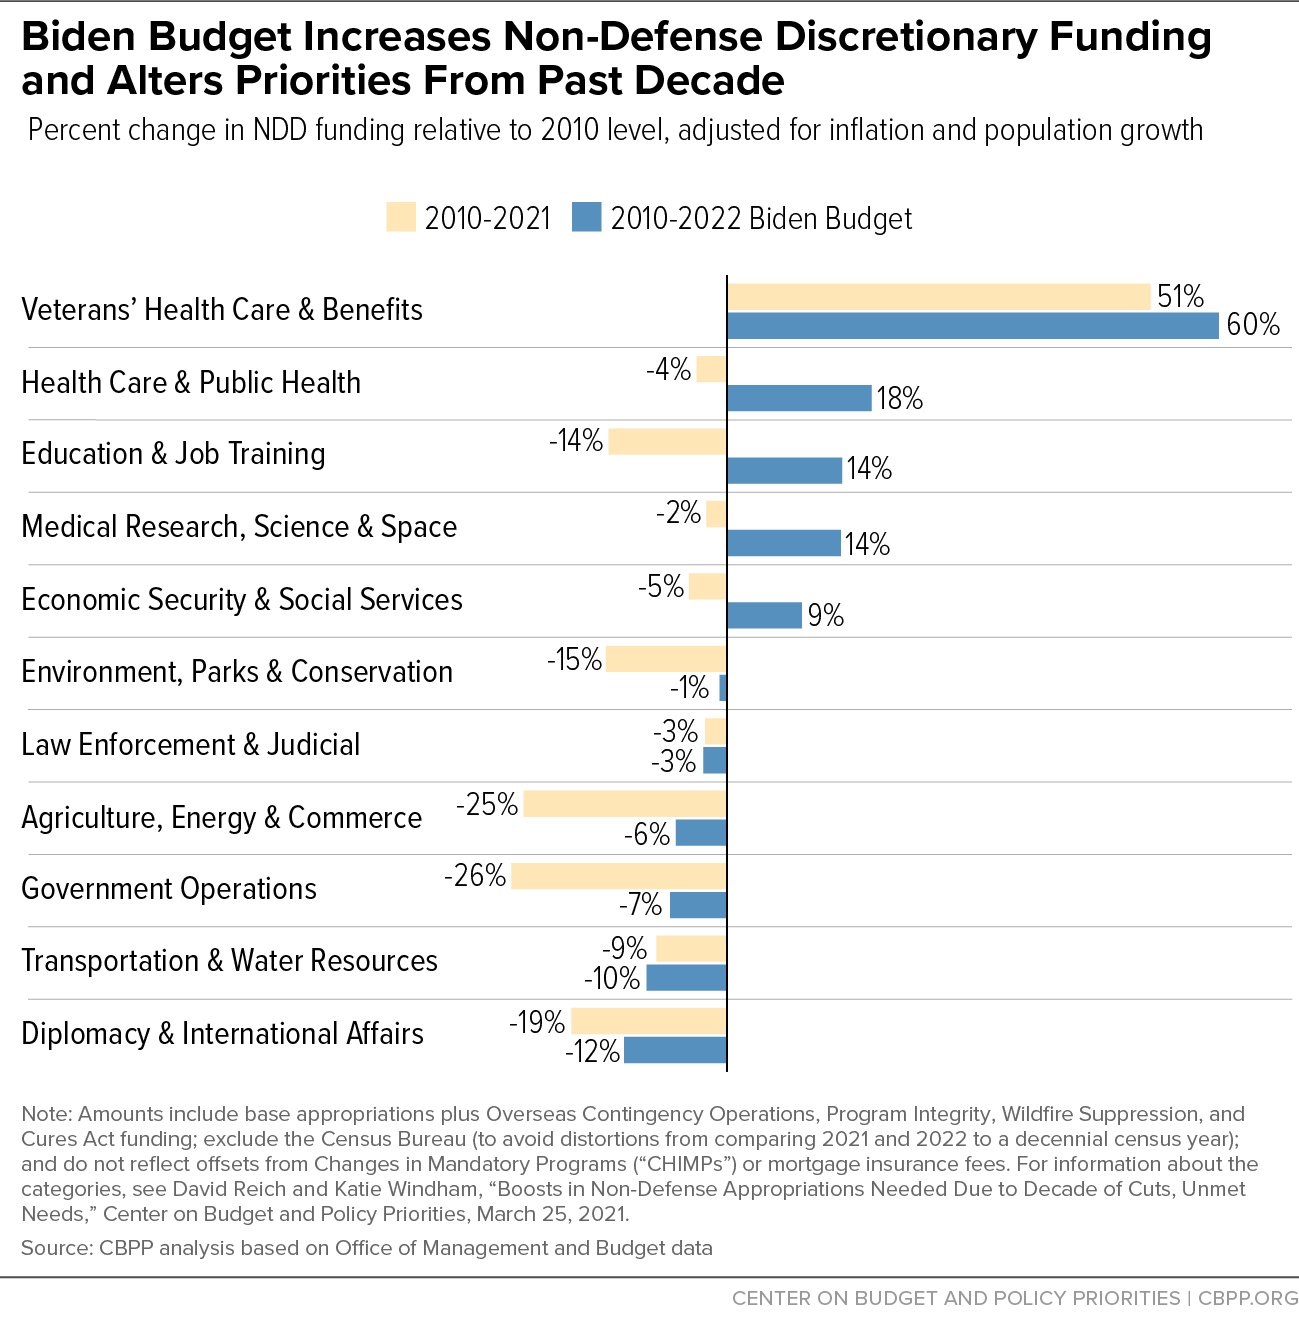 Biden Budget Increases Non-Defense Discretionary Funding and Alters Priorities From Past Decade